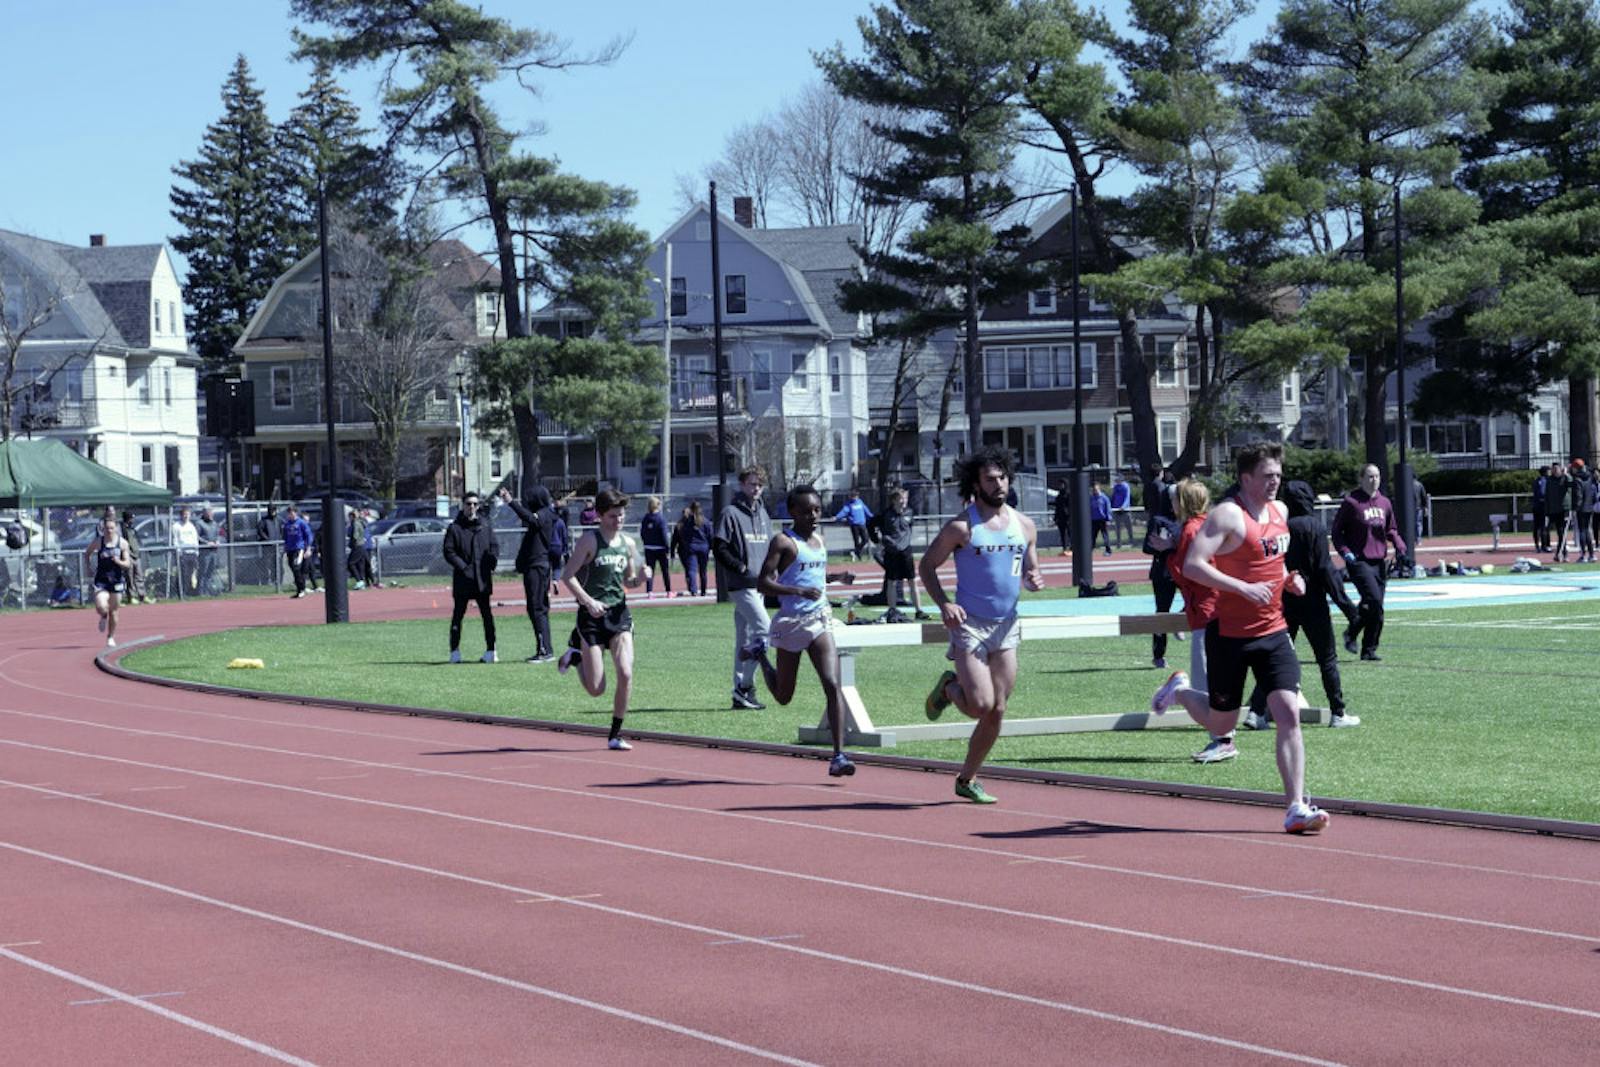 Tufts outdoor track teams have robust start at Snowflake Classic The